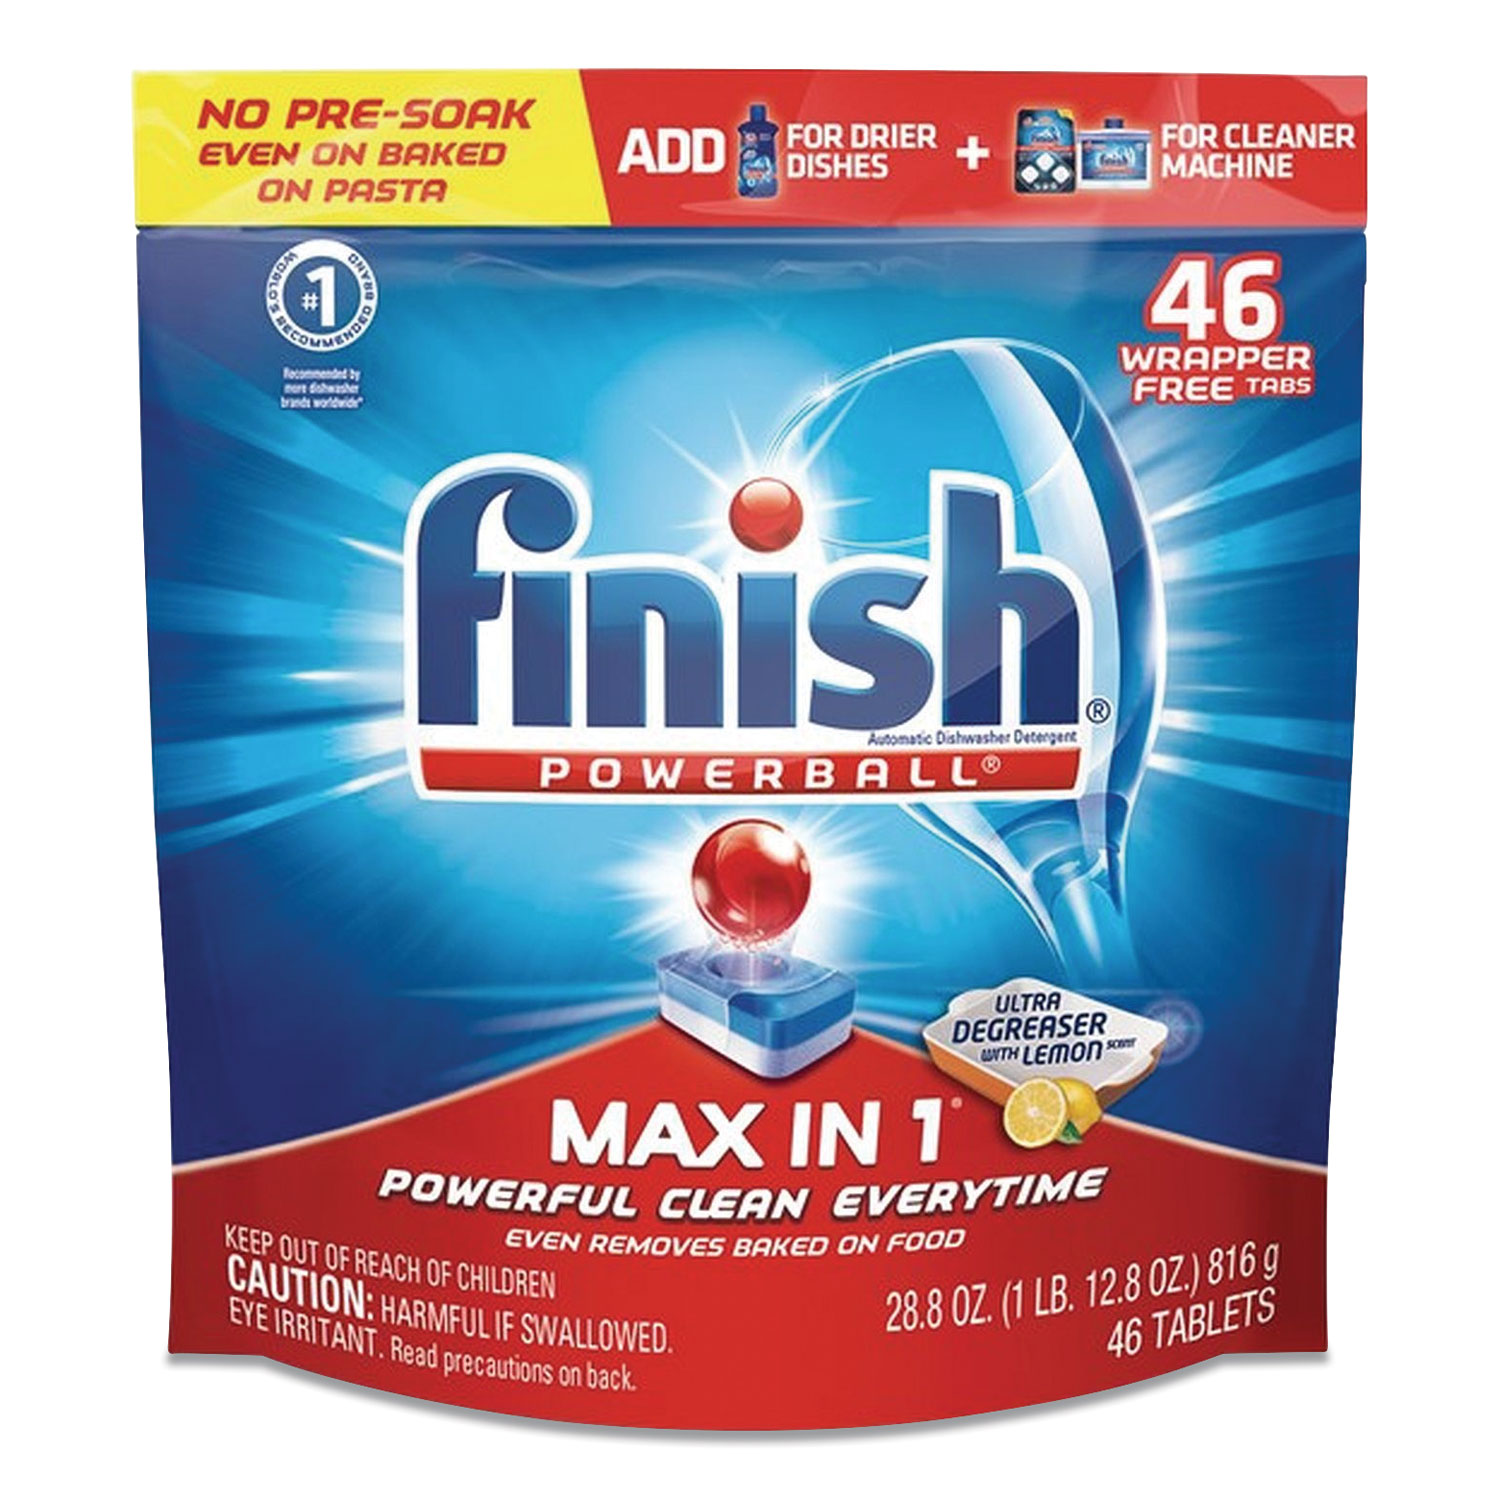 FINISH® Powerball Max in 1 Super Charged Ultra Degreaser Dishwasher Tabs, Lemon, Wrapper-Free, 46/Pack, 4 Packs/Carton